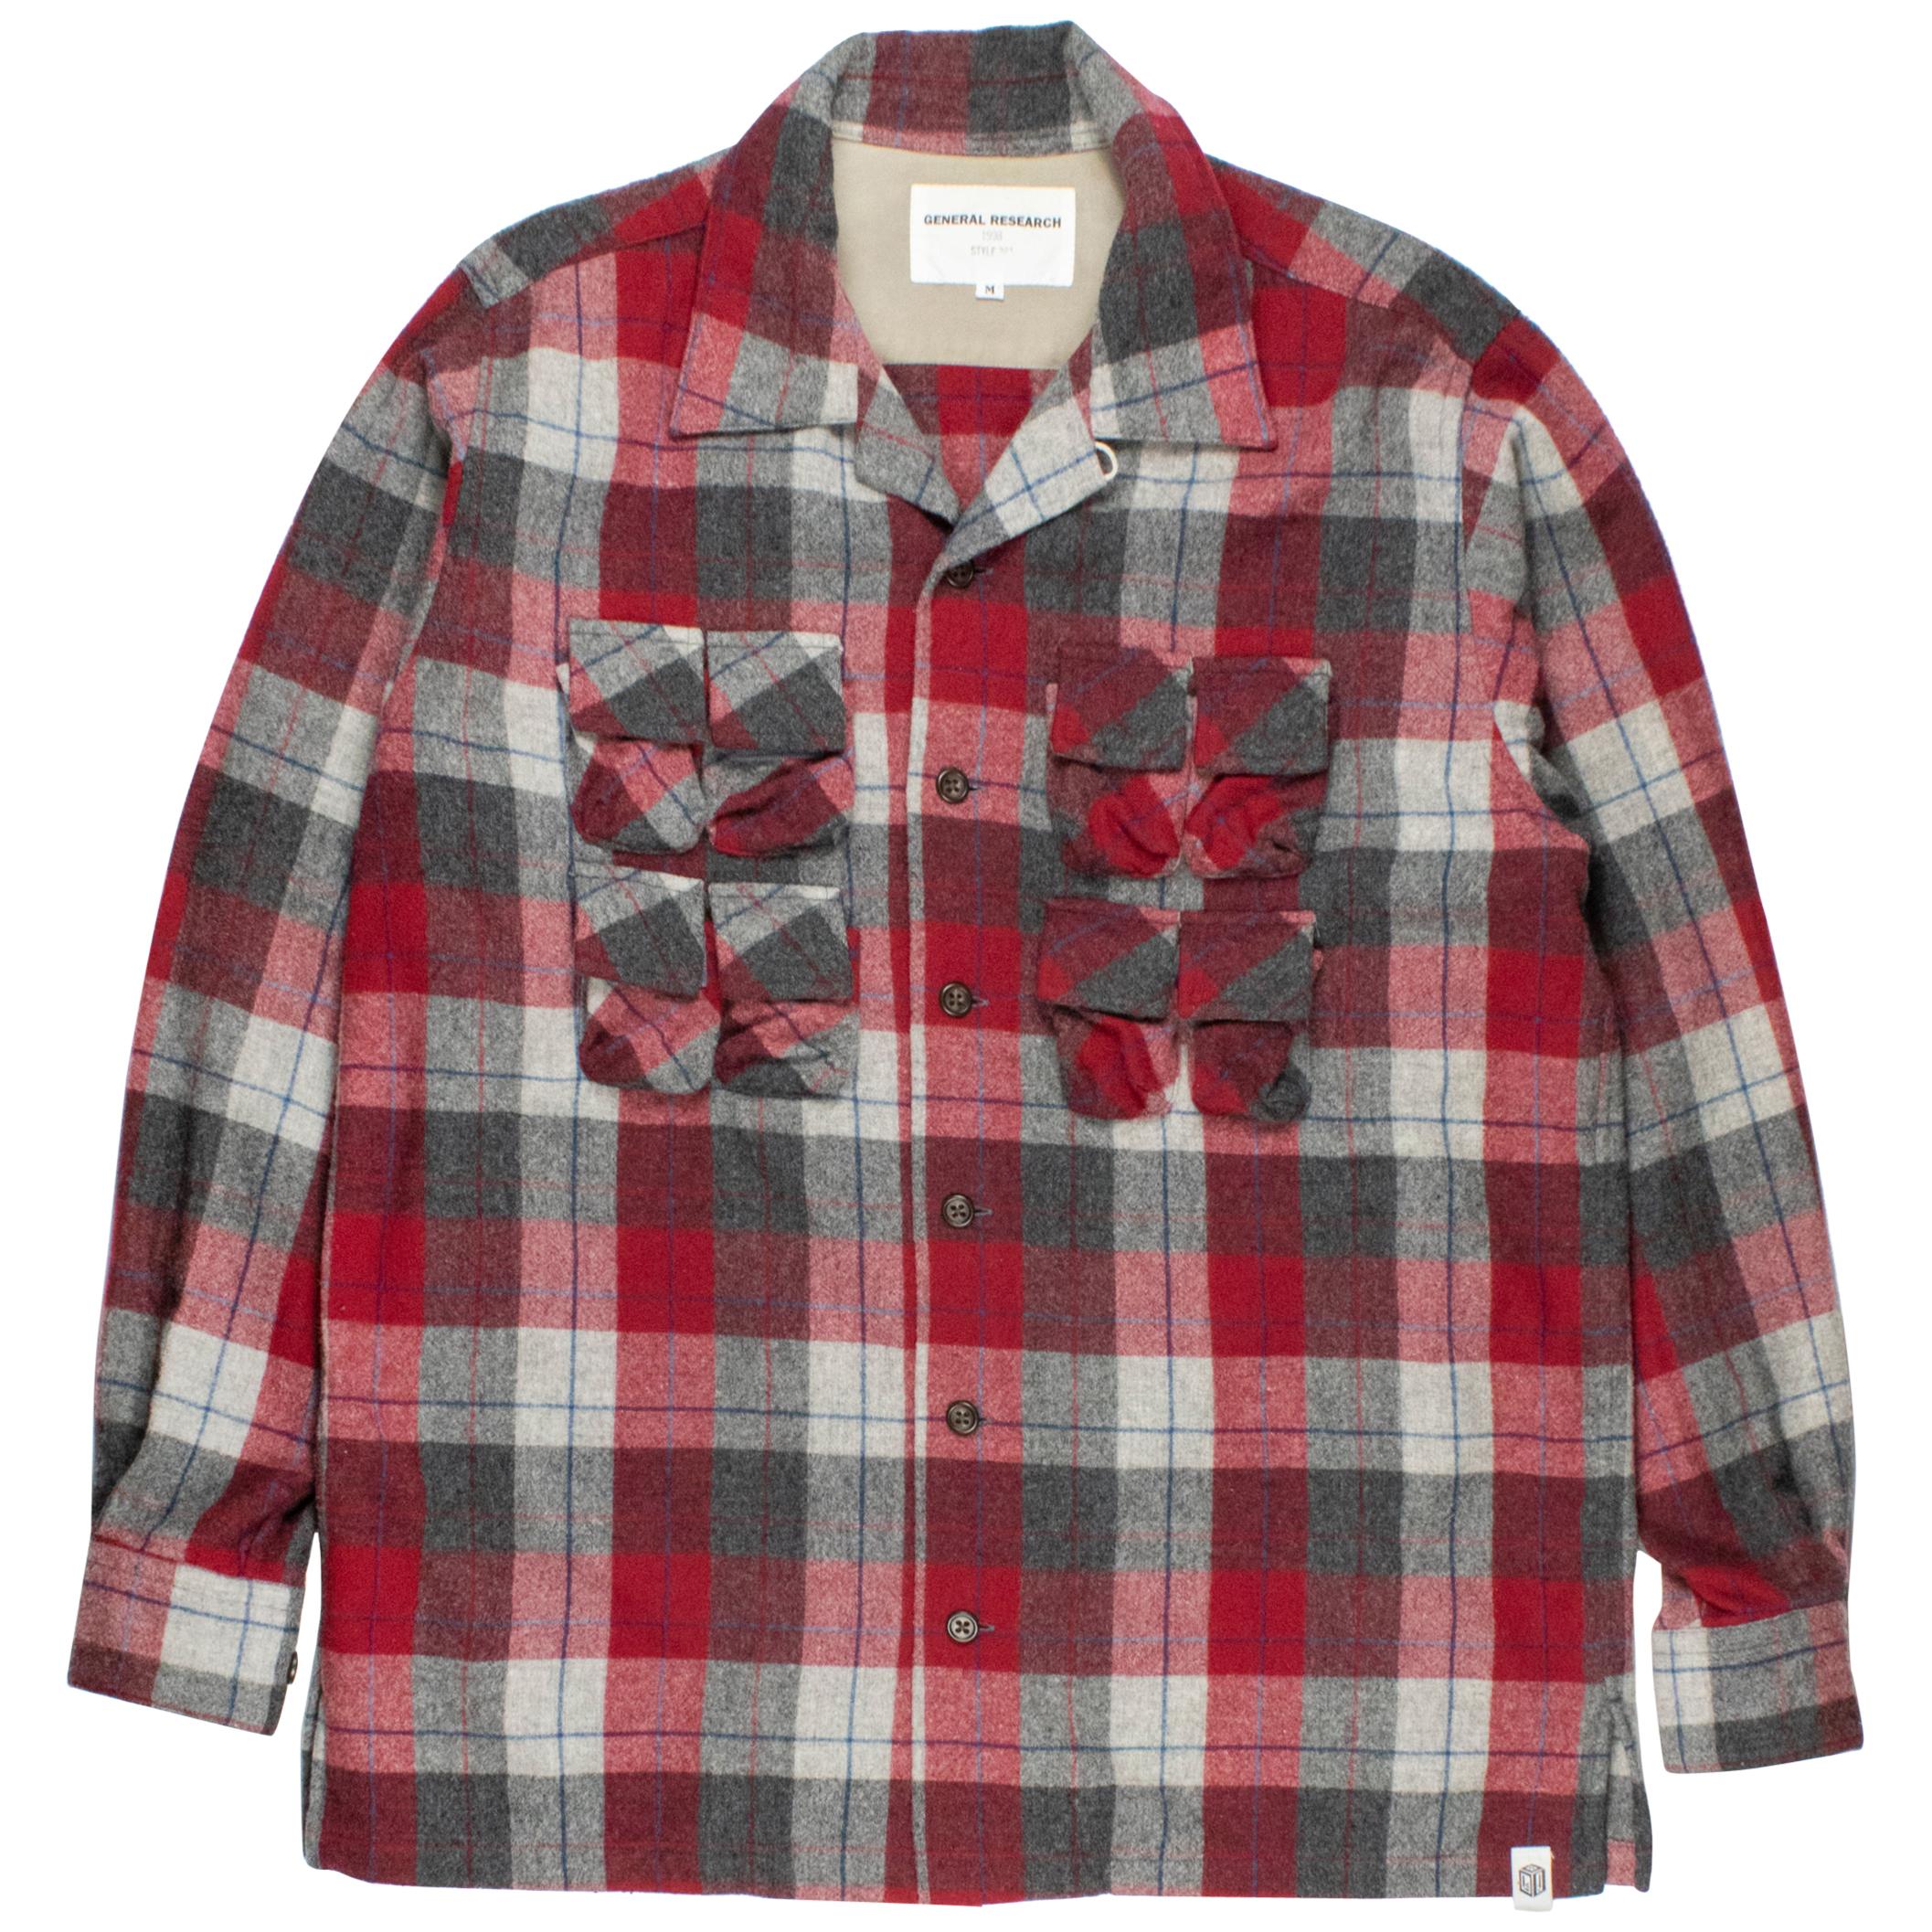 General Research 1998 Parasite Flannel Cargo Shirt